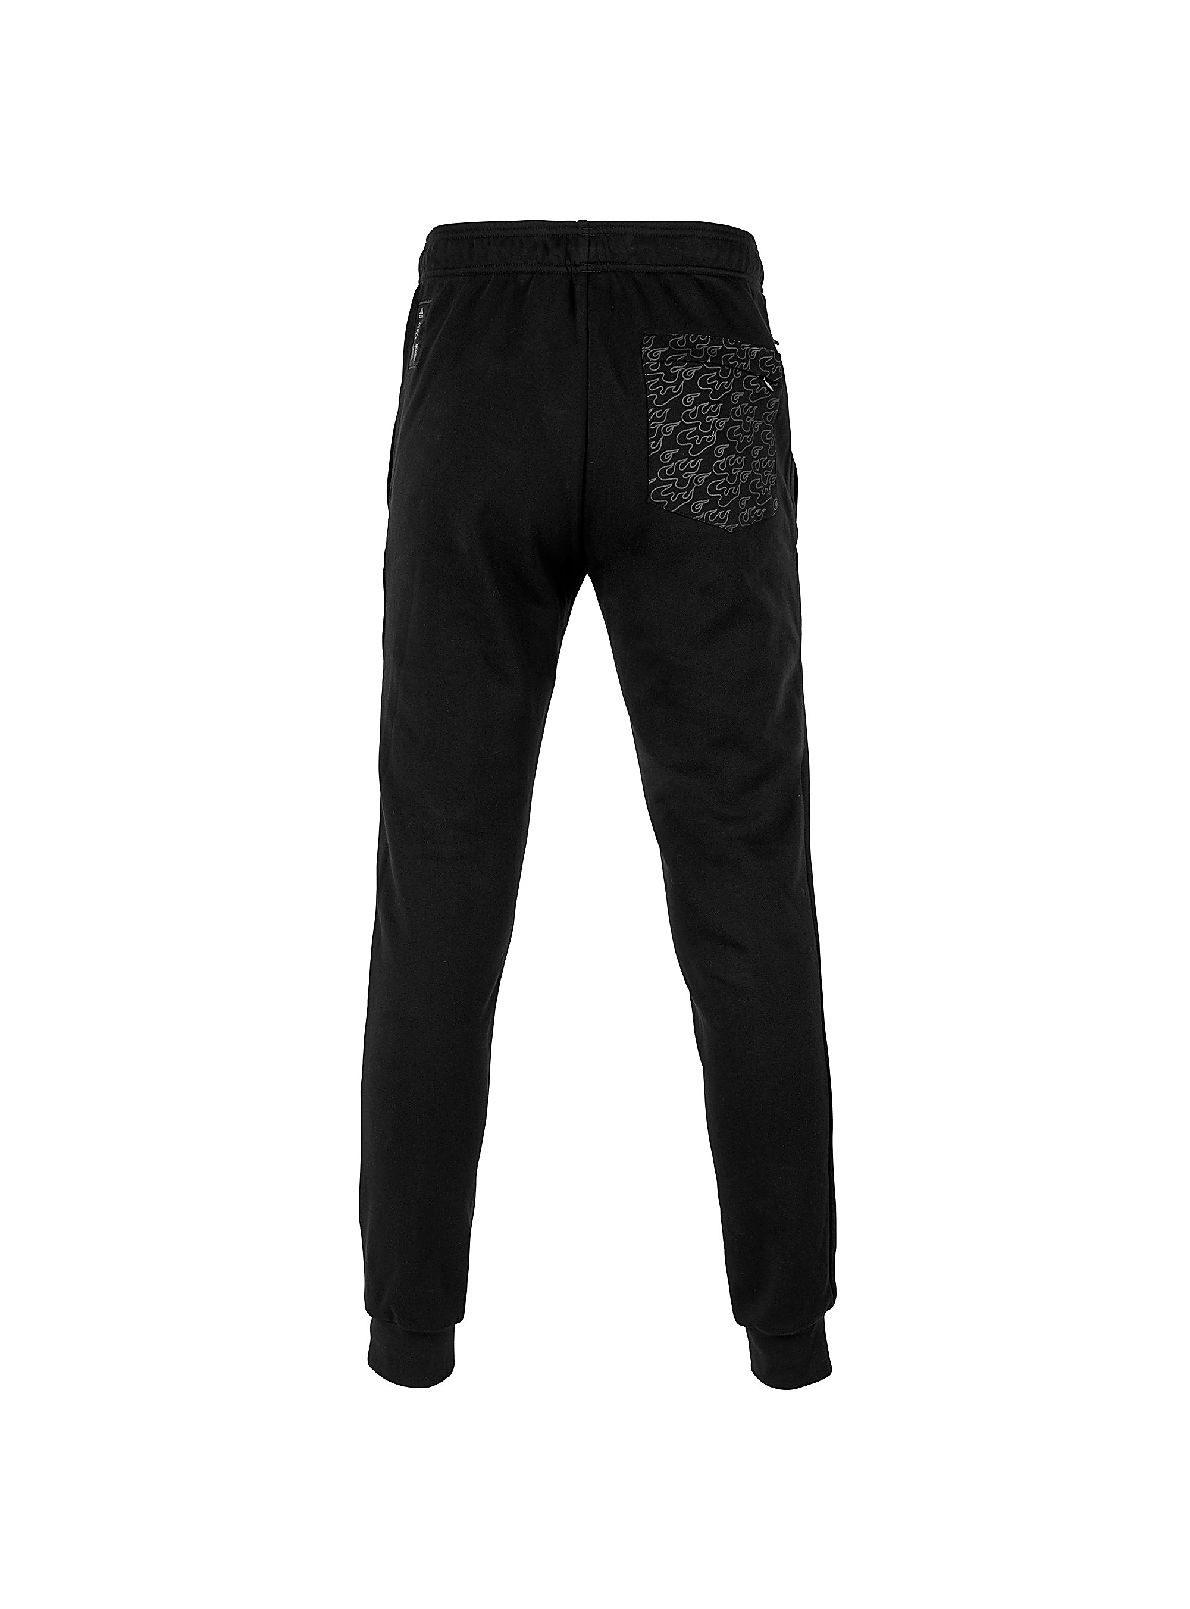 Arsenal CNY Sweatpants | Official Online Store